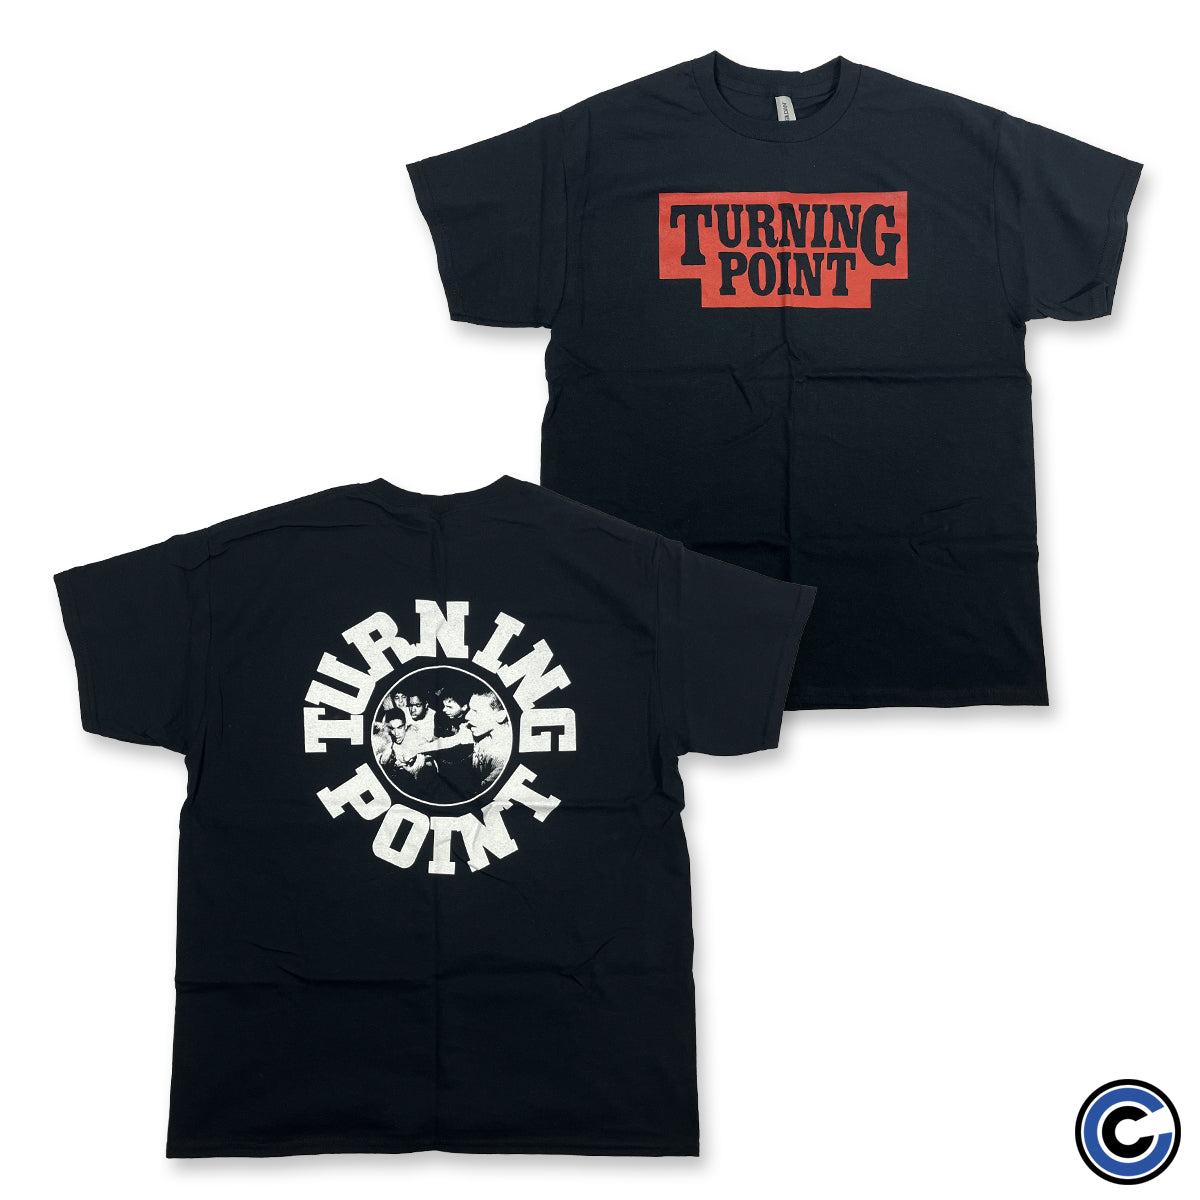 Turning Point "Block Letters" Shirt